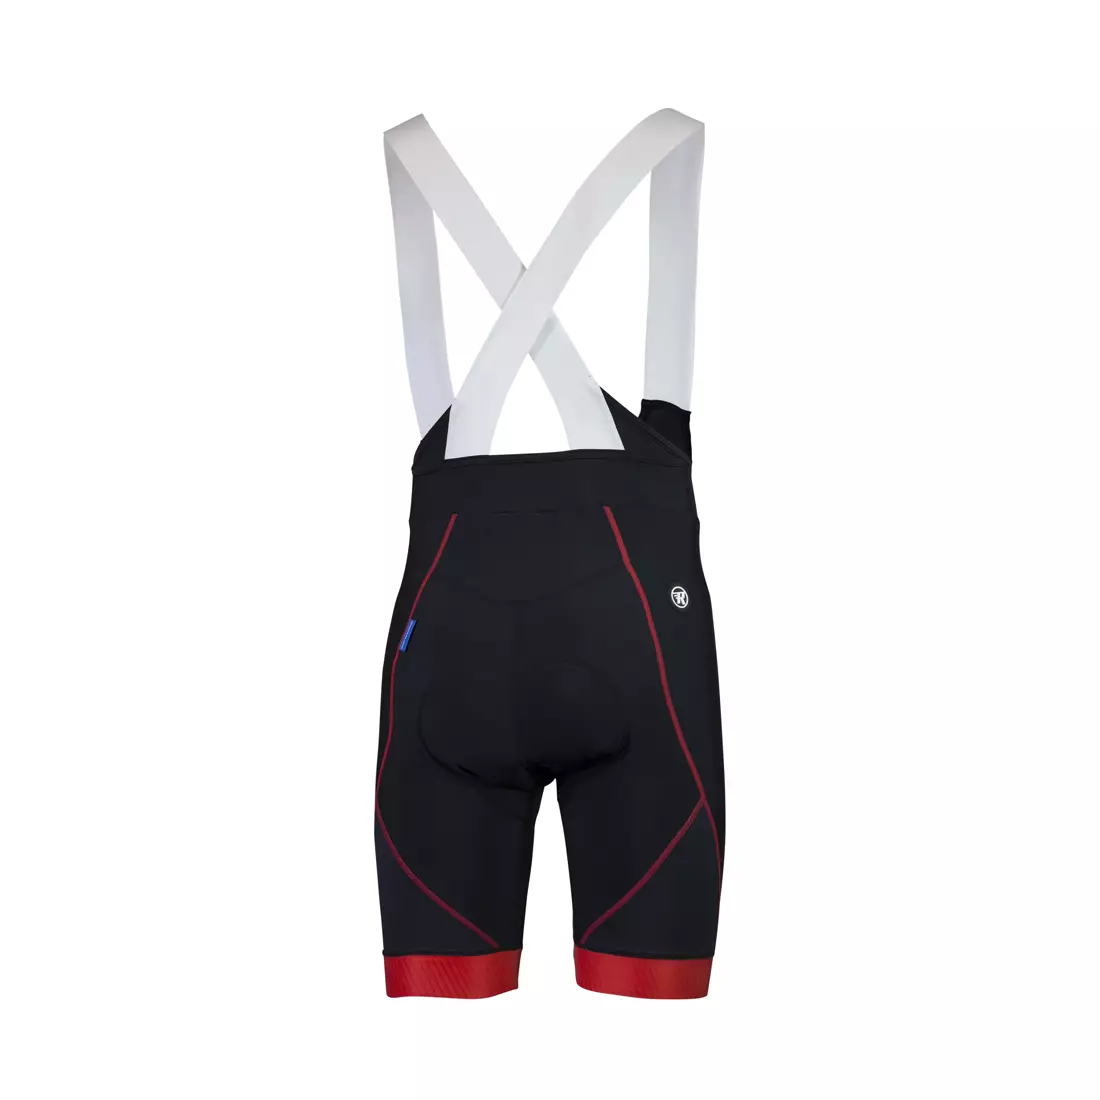 ROGELLI PORRENA 2.0 men's cycling shorts, harness, red